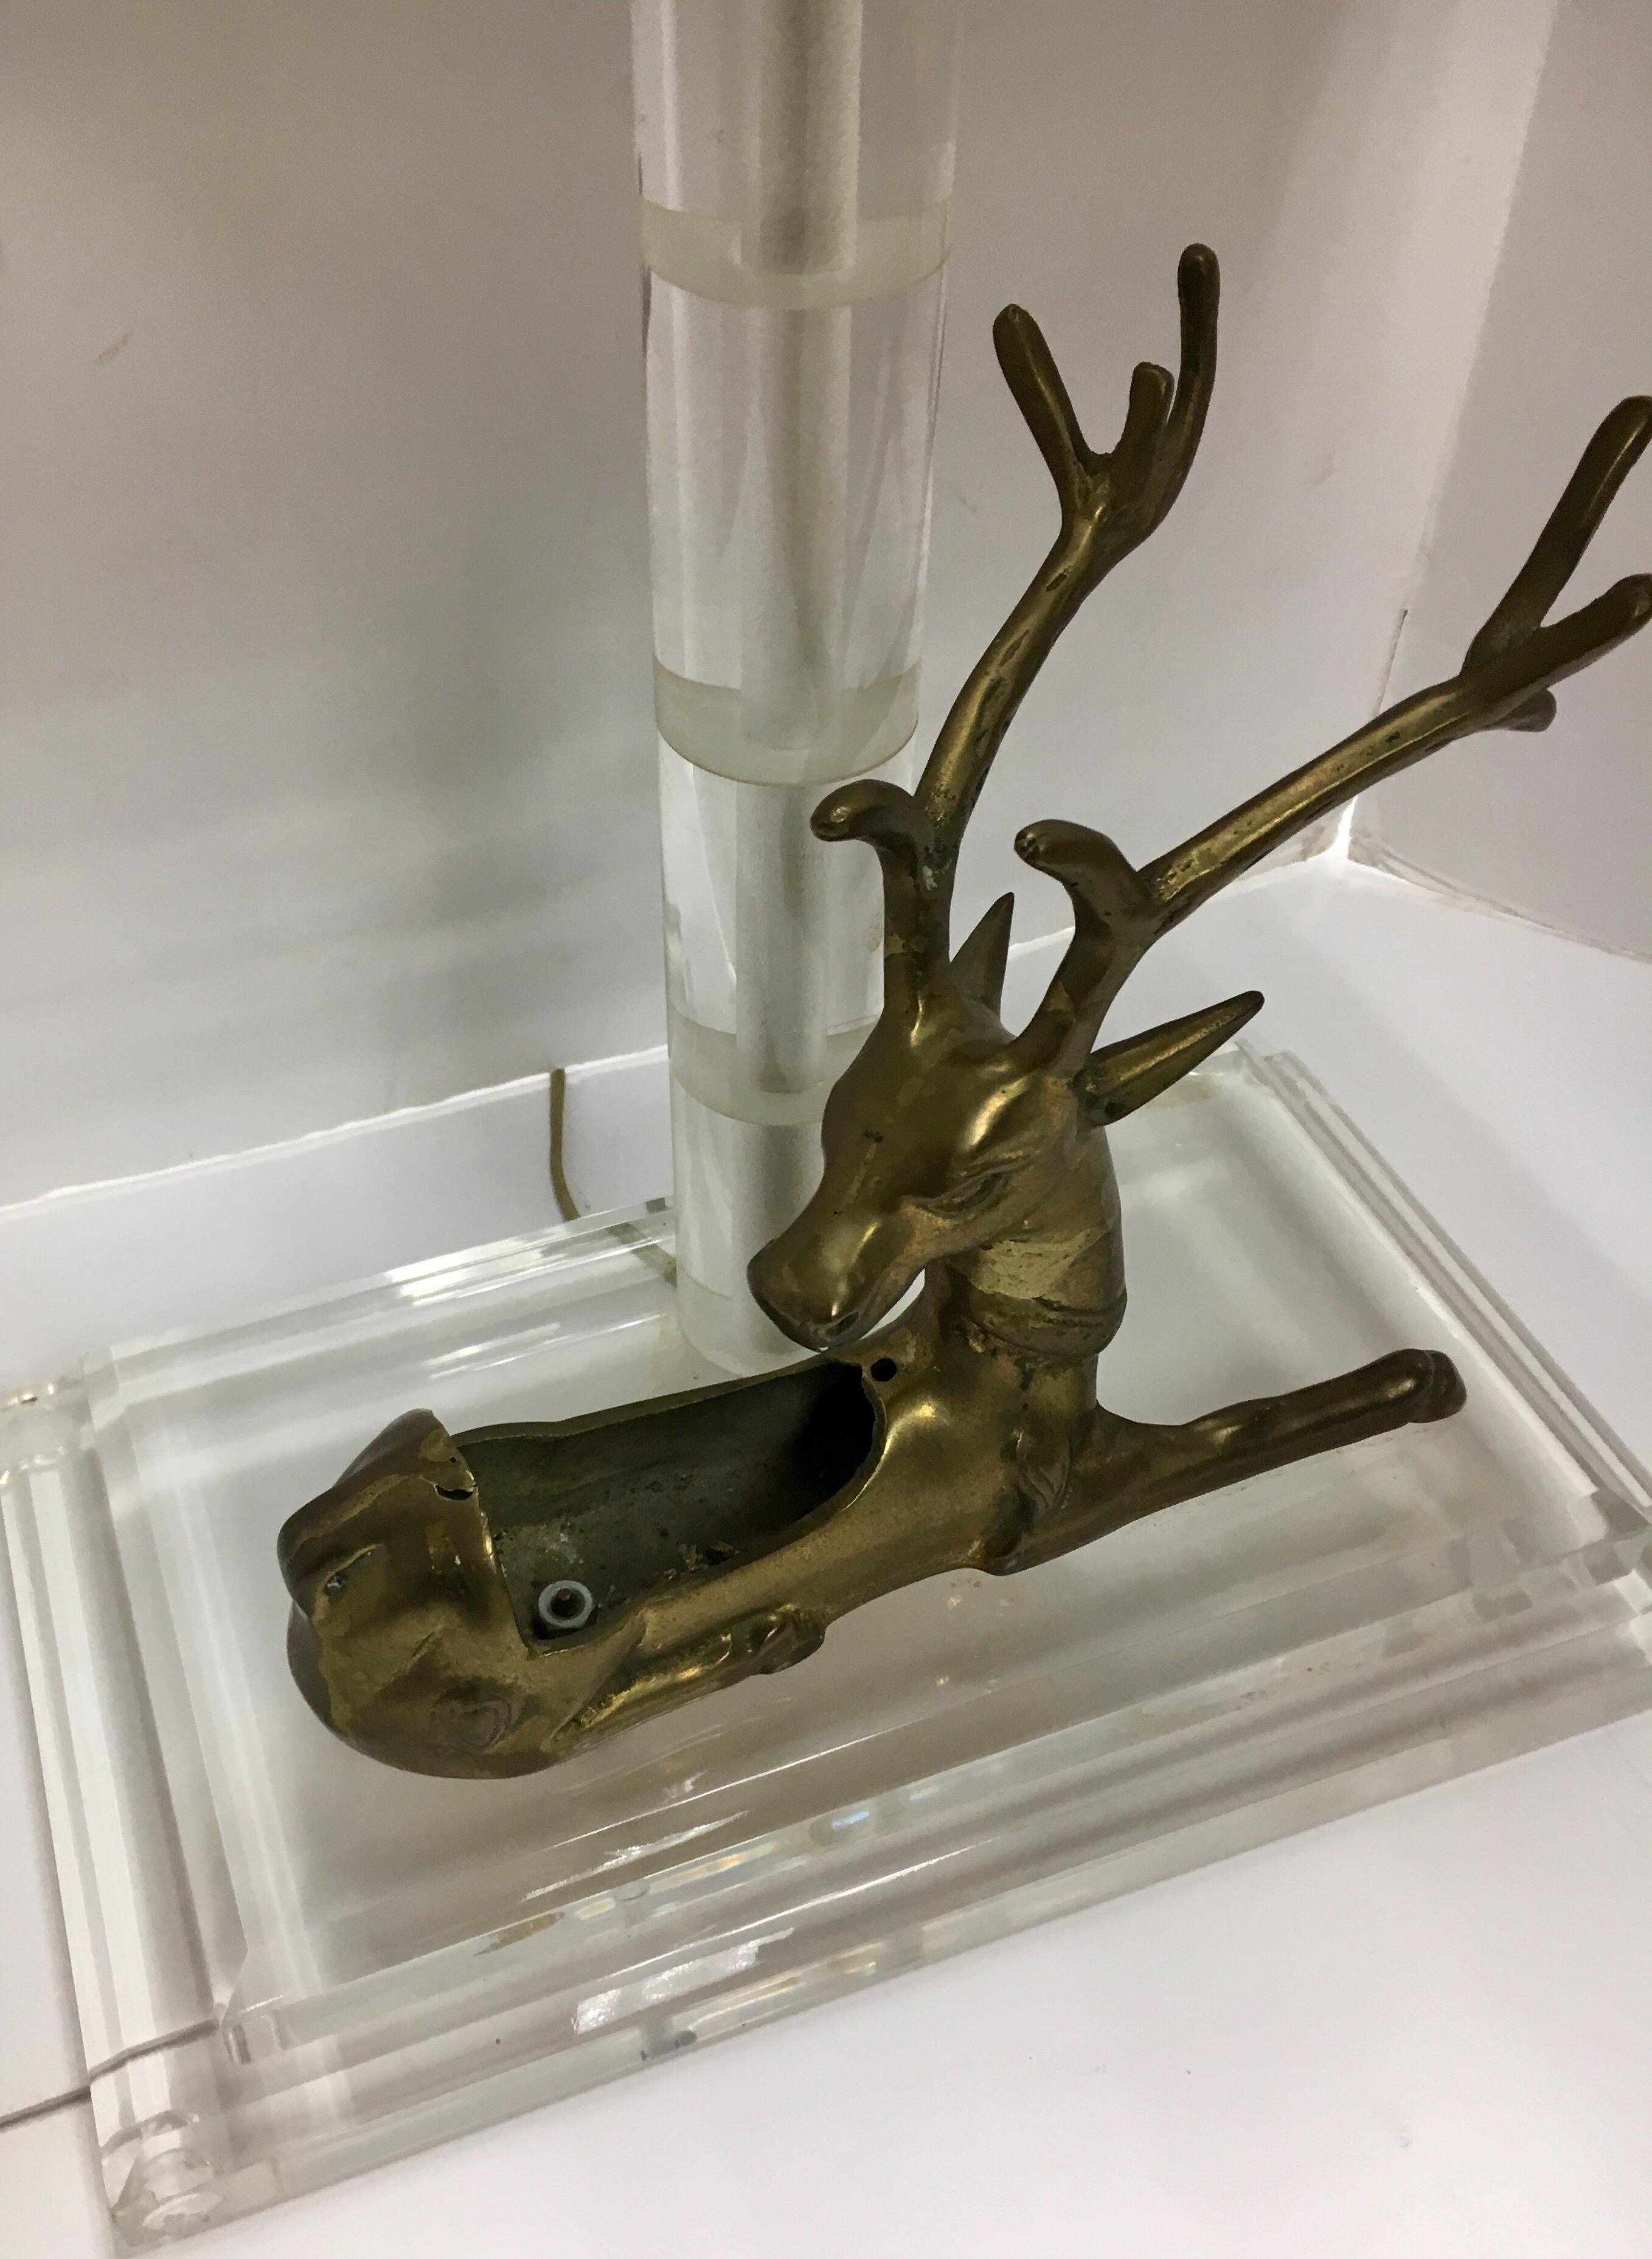 Late 20th Century Mid-Century Modern Lucite and Brass Table Lamp with Reindeer Deer Card Holder